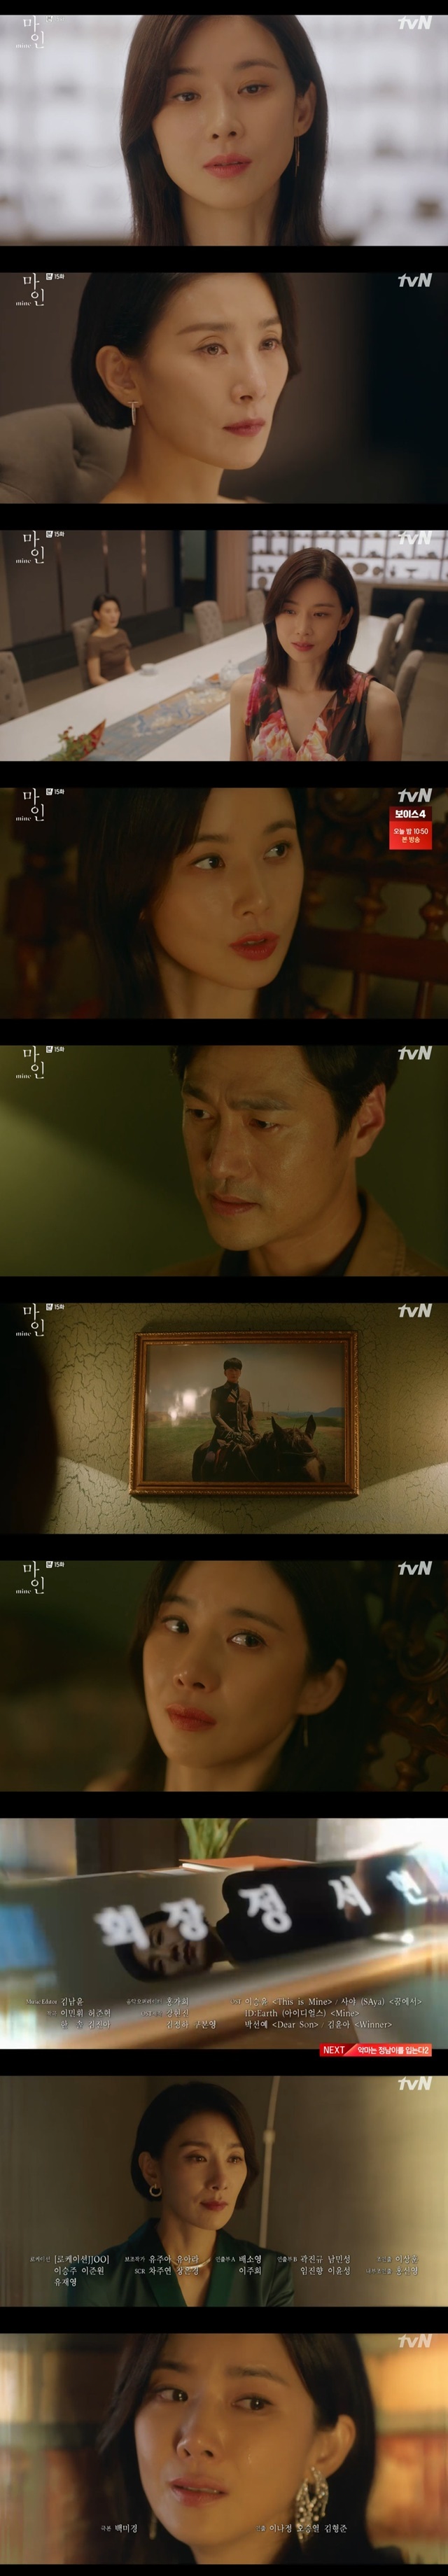 Lee Bo-youngs Memory Loss Acting reveals guilt for dead husband Lee HyeonwukIn the 15th episode of TVNs Saturday, which aired on June 26, Seo Hee-soo (Lee Bo-young) revealed that he is doing a memory loss to protect something.Seo Hee-soo and Jeong Jeong-hyeon (Kim Seo-hyung) revealed the reality of Han Ji-yong (Lee Hyeonwuk) with an interview video by Lee Hye-jin (Kang Ja-kyung/Ok Ja-yeon) to prevent him from becoming CEO.Han Ji-yong was angry and wrote to Seo Hee-soo that the sex minority, Jeong Jeong-hyun, could not have a filial piety, and Seo Hee-soo later found out that Jeong Jeong-hyun was a sex minority.Seo Hee-soo told Jeong Jeong-hyeon, My brother is a tall sister. Hes trying to protect me. Im on your side.Whatever you want, do what you want. Ill protect you.Then, questionable circumstances were captured in the eyes of BackDetective (Choi Young-joon), who investigated the case after Han Ji-yong died.Seo Hee-soo, who crashed with Han Ji-yong, lost his memory, and Maid Kim Sung-tae (Lee Jung-ok) left for Monaco with the help of Han Jin-ho (Park Hyeok-kwon).Another Made testified that Han Ji-yong had been taking the strong sleeping pills he had been prescribed.There was a part of the backDetective that missed out: when the poisonous gas was found in Kim Sung-taes room, Jeong Jeong-hyeon snubbed the contract and blocked the maids mouths.The main deacon (Park Sung-yeon) was caught by Jeong Seo-hyun while trying to sneak away. Kim Sung-tae called Detective himself and said, I did not kill him.I opened the door to the underground bunker, he said, and the backhead headed for the underground bunker.In the meantime, Lee Hye-jin and Jeong Jeong-hyun noticed that Seo Hee-soos memory loss was Acting.Kang Ja-kyung asked Seo Hee-soo, who makes his son Han Ha-joon (Jung Hyun-joon)s favorite waffle, Why do I have to add Acting that I do not know? And Seo Hee-soo replied, Play off and move on.I dont care if you killed him, Lee said. I just want to know the end.Seo asked Seo Hee-soo, You are remembering all the East and West, and you are remembering everything on the day of the accident. Seo Hee-soo whispered, I can not tell you now.Seo and Seo did not speak out of their mouths, but they counted their own things to keep in their minds. Seo said that Lee and his son Han Ha-jun would leave for study as scheduled.Seo Hee-soo said, The tea I drank today, the one my brother gave me as a welcome when I first met my brother. My brother said that he likes it because it is thicker than espress and deeper than black tea.This lemongrass scent, its so toxic today, like my heart toward you. He revealed that he had not lost his memory, and went to the underground bunker and met the back.When the back asked, Seo Hee-soo, you all remember, did you kill Han Ji-yong? Seo Hee-soo said, Yes, I did.I think I killed him, but what if I can not remember anything? I can not help you. BackDetective was laughing, and Seo Hee-soo, who was left alone, shed tears when he saw Han Ji-yongs photo.